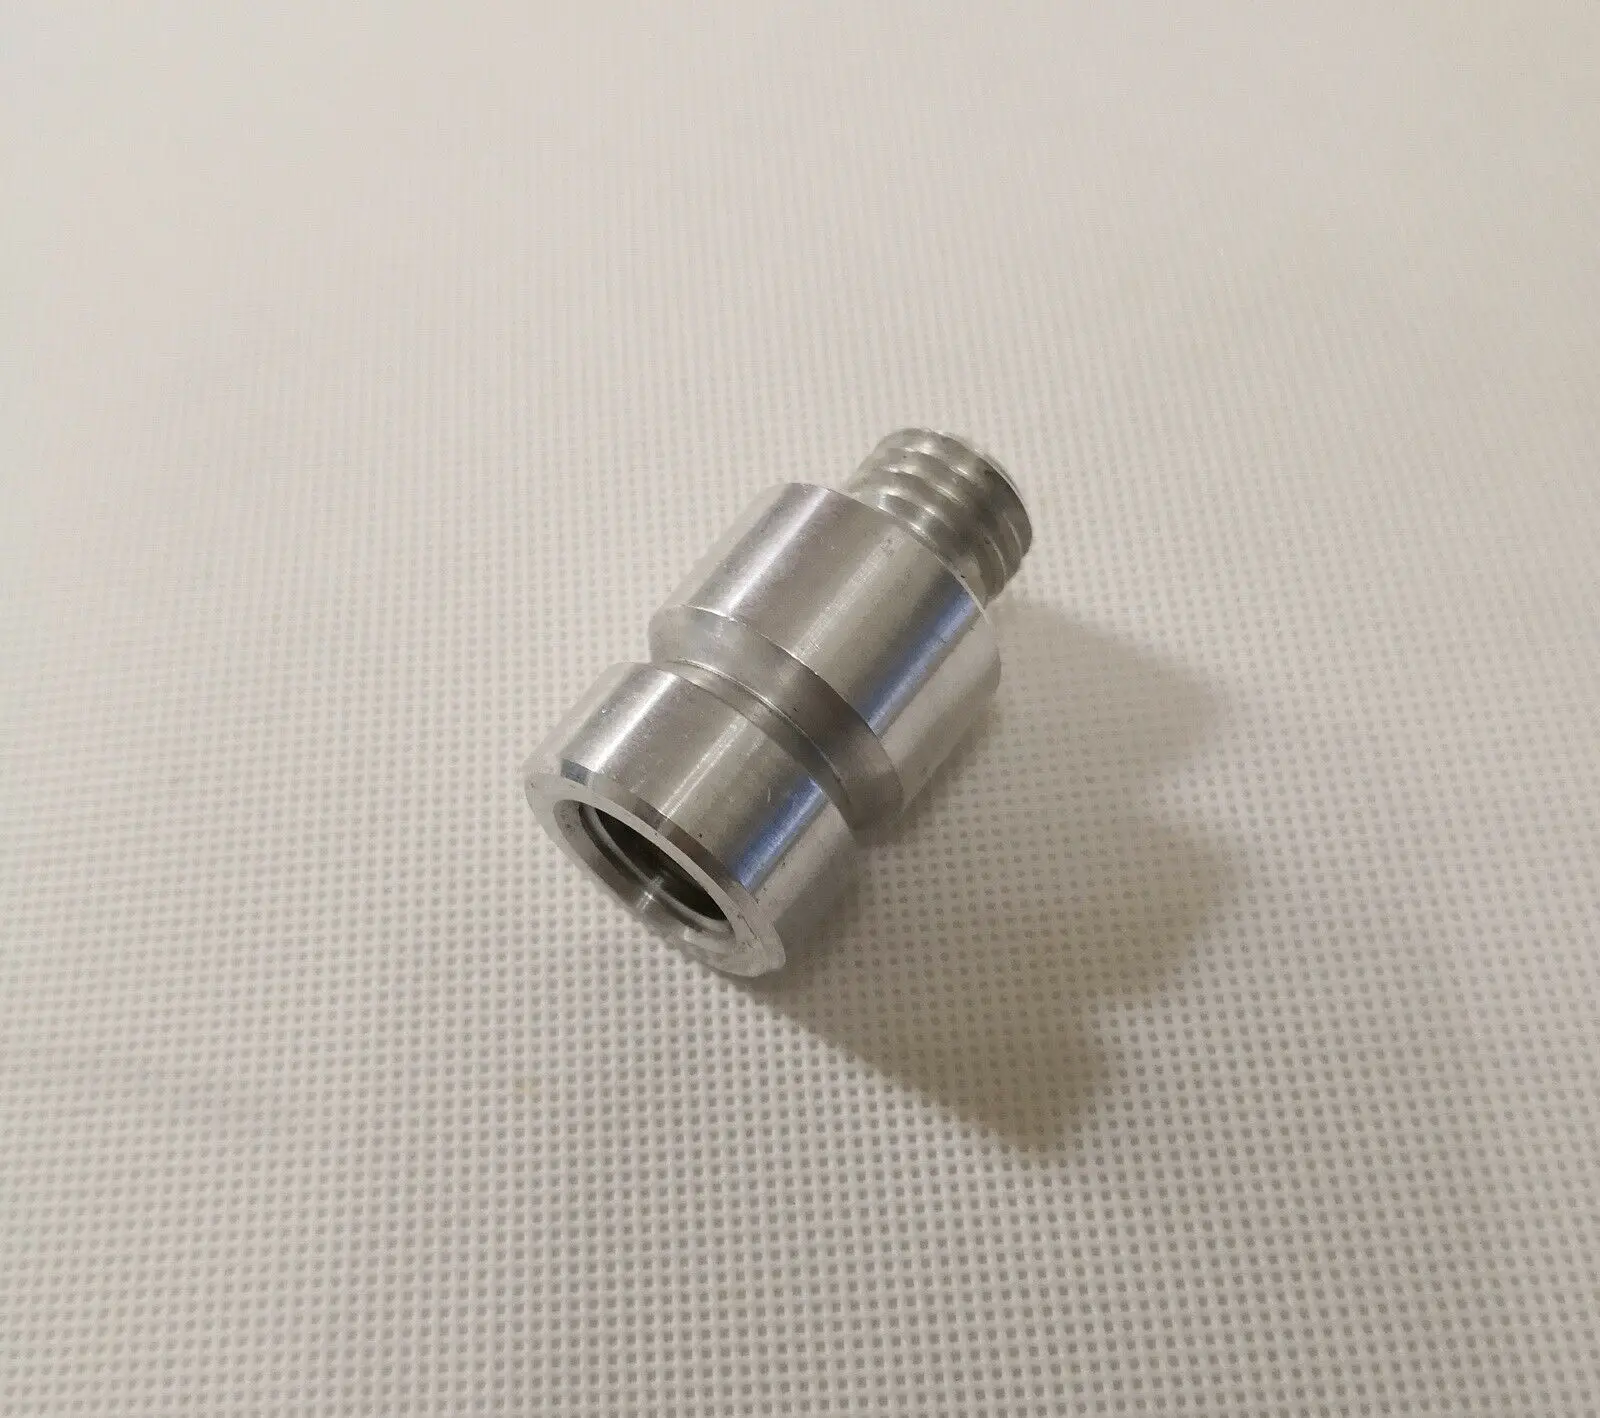 5/8 x 11 thread both for GPS/prism male thread and female thread 30mm Adapter 